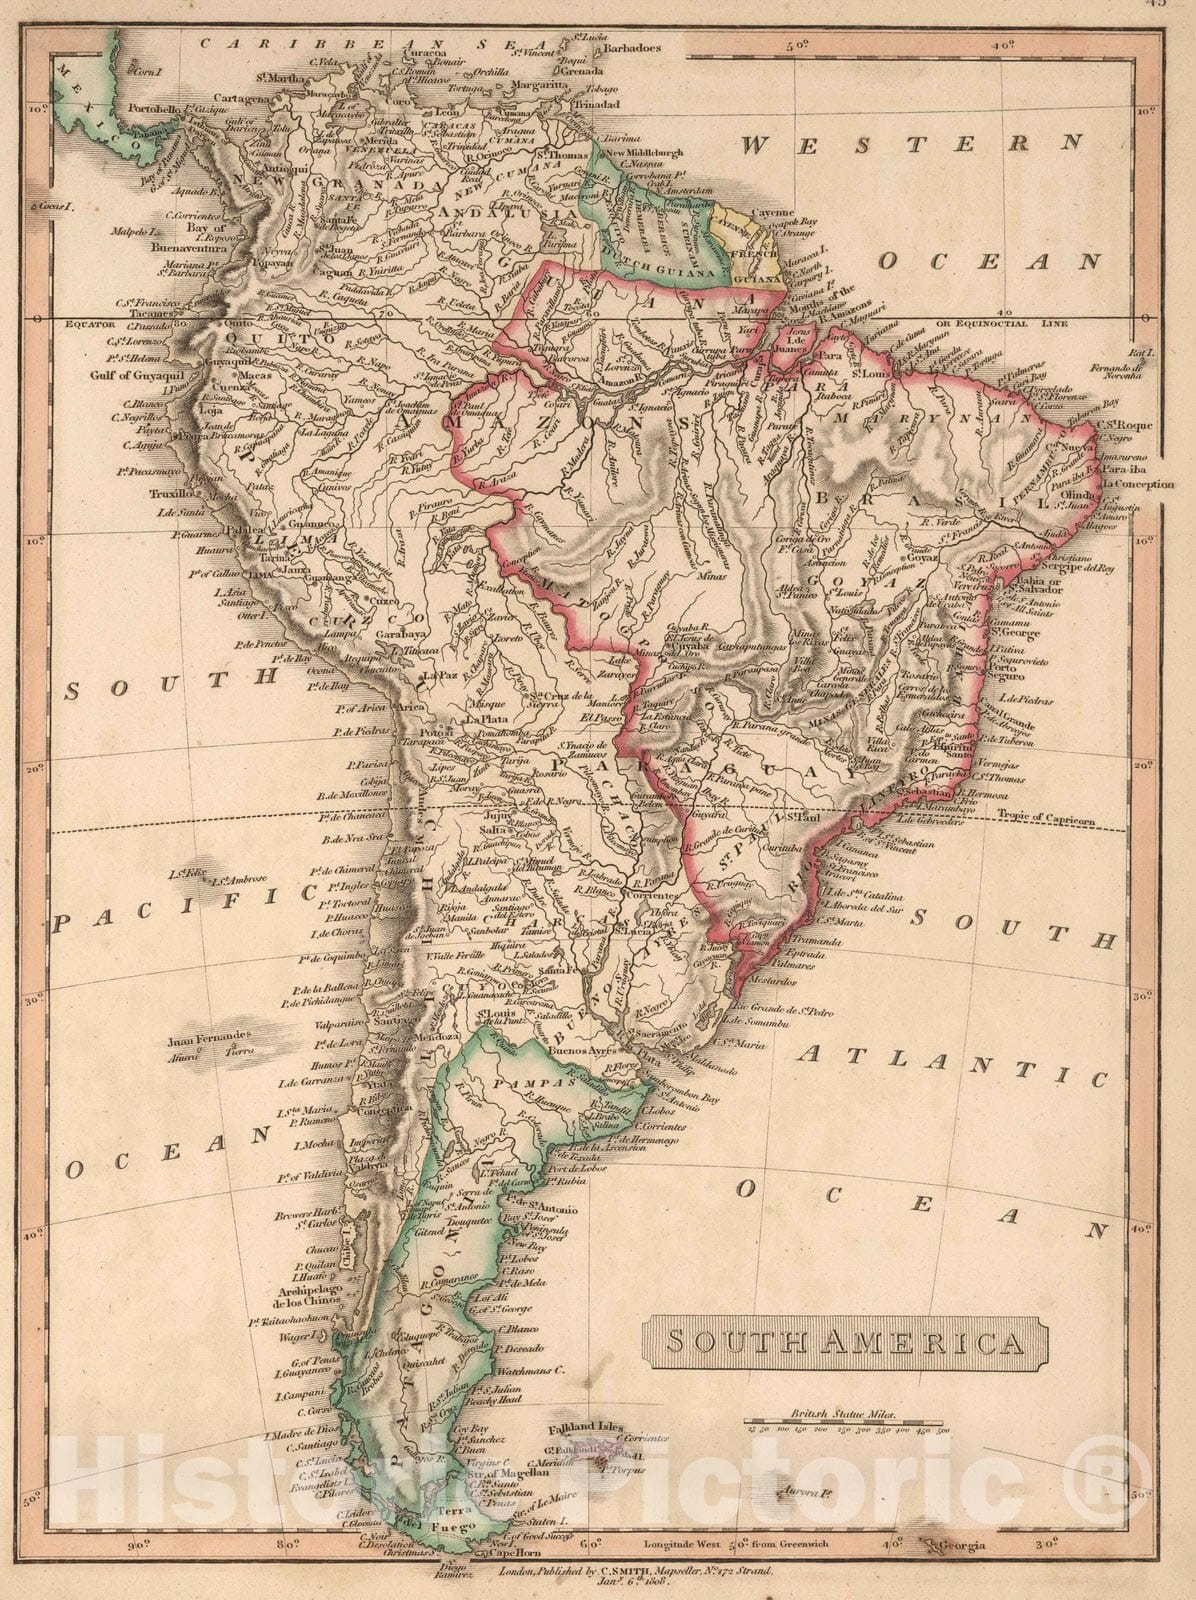 Historic Map : 1808 South America. - Vintage Wall Art